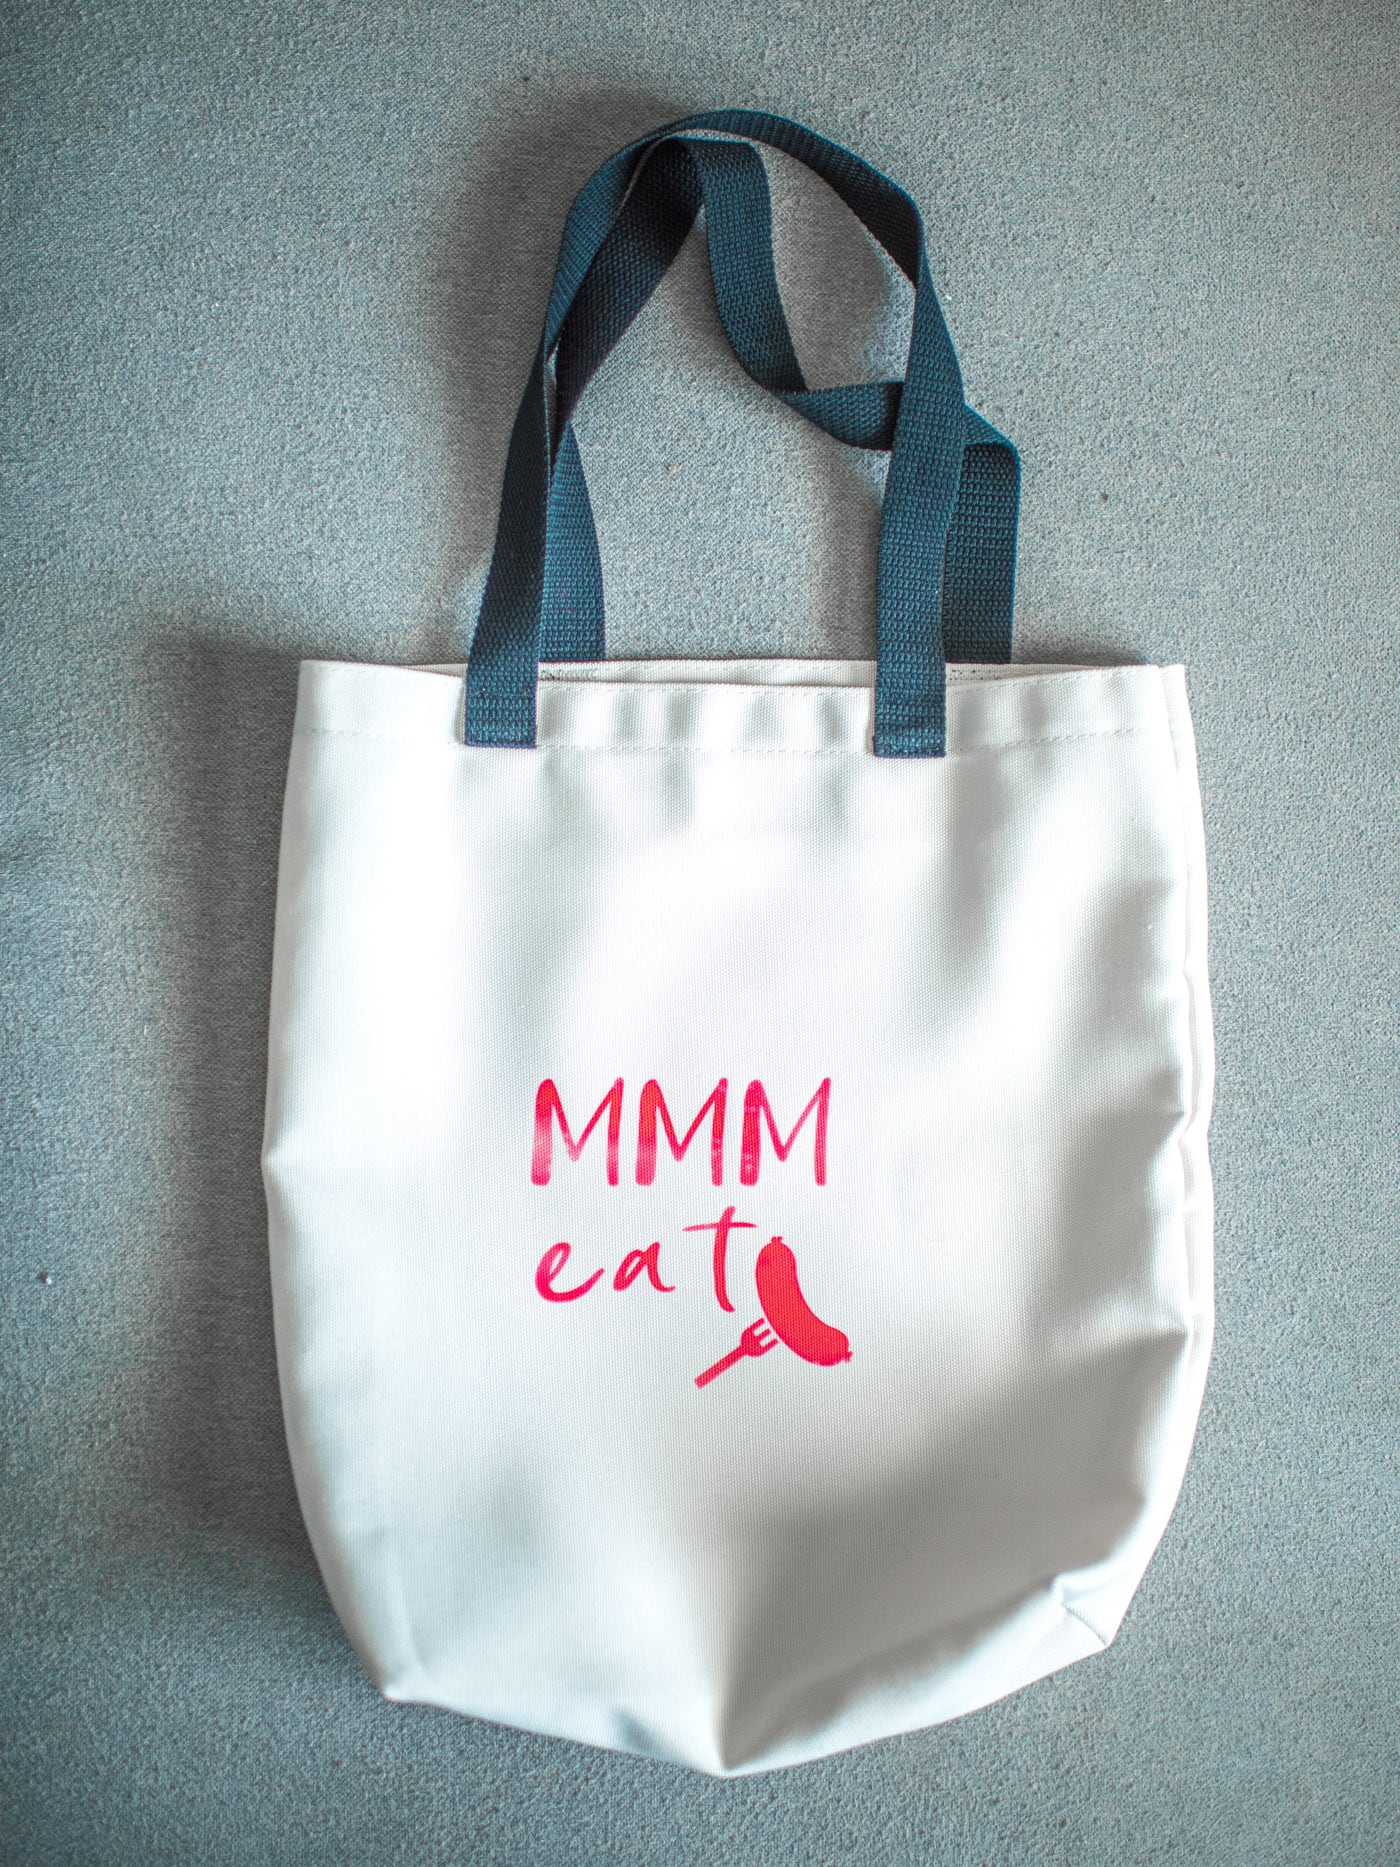 MMMeat grocery tote bags